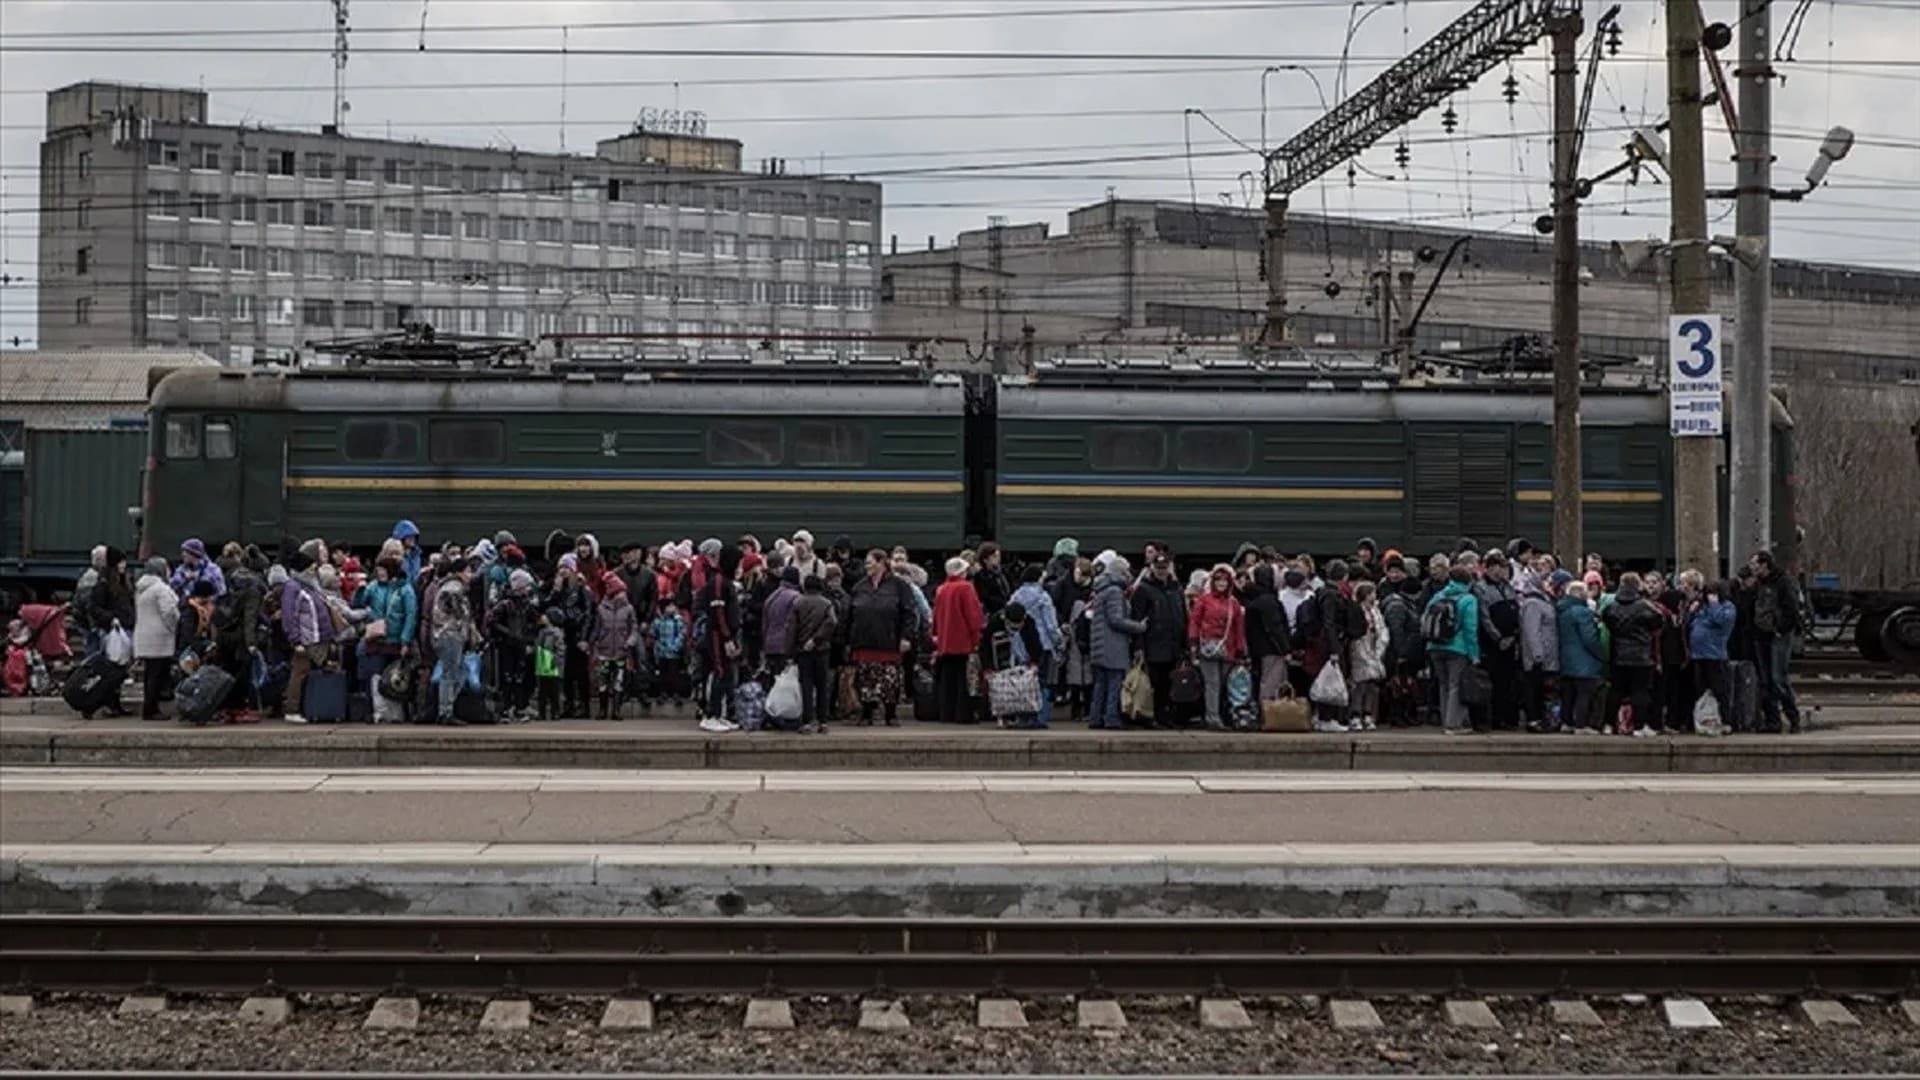 Civilians gather at the Kramatorsk station to be evacuated from combat zones in eastern Ukraine